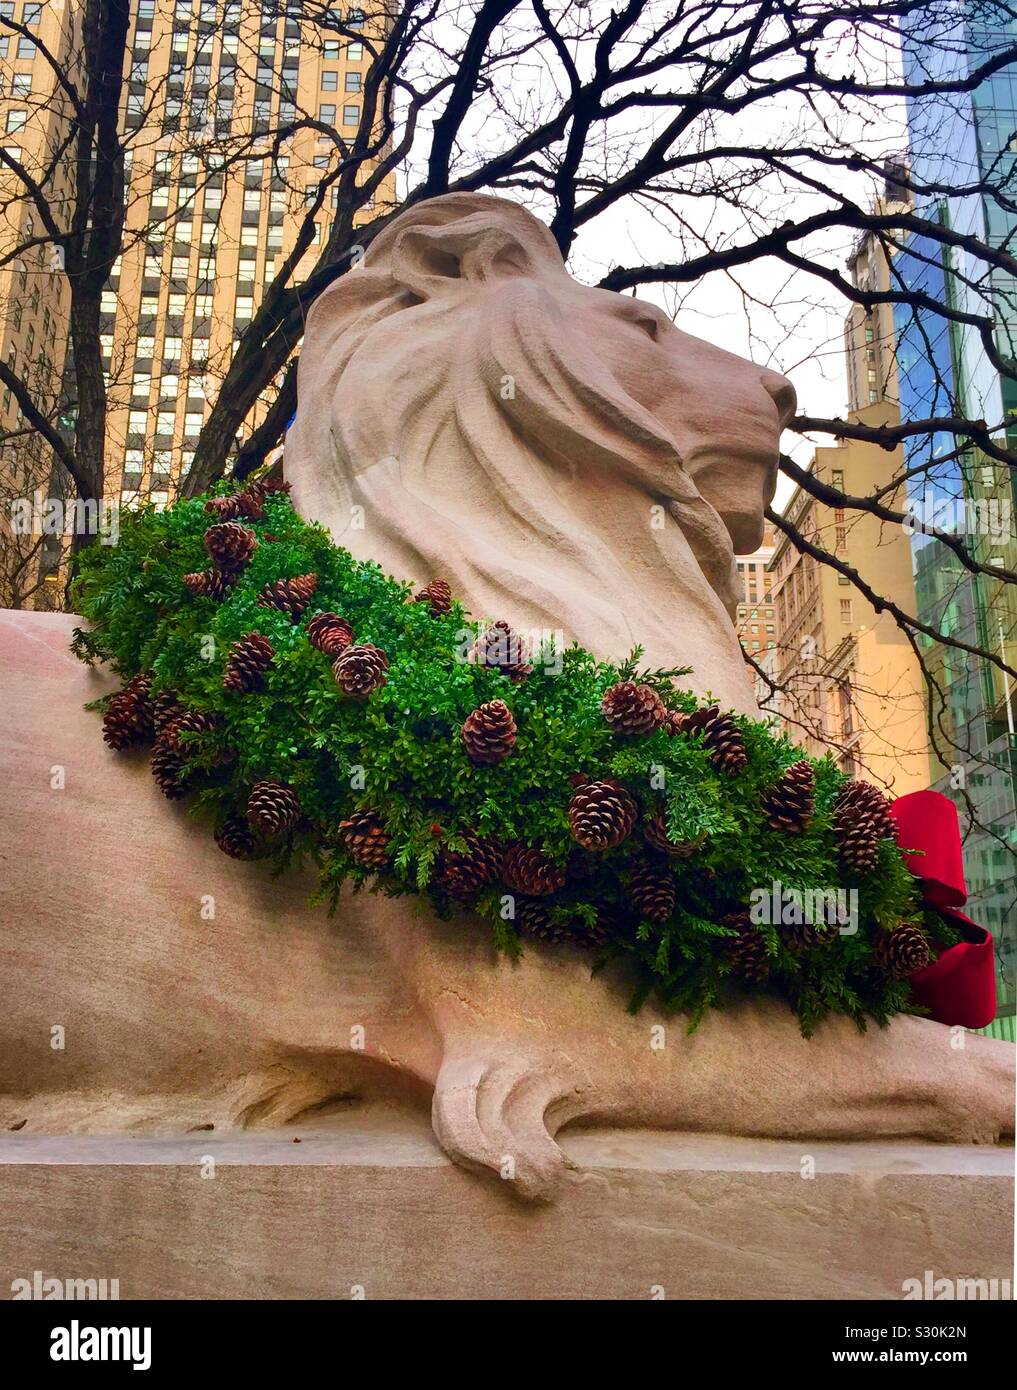 Fortitude one of the two library lions on fifth Avenue has his holiday wreath in a seasonal celebration, NYC, USA Stock Photo